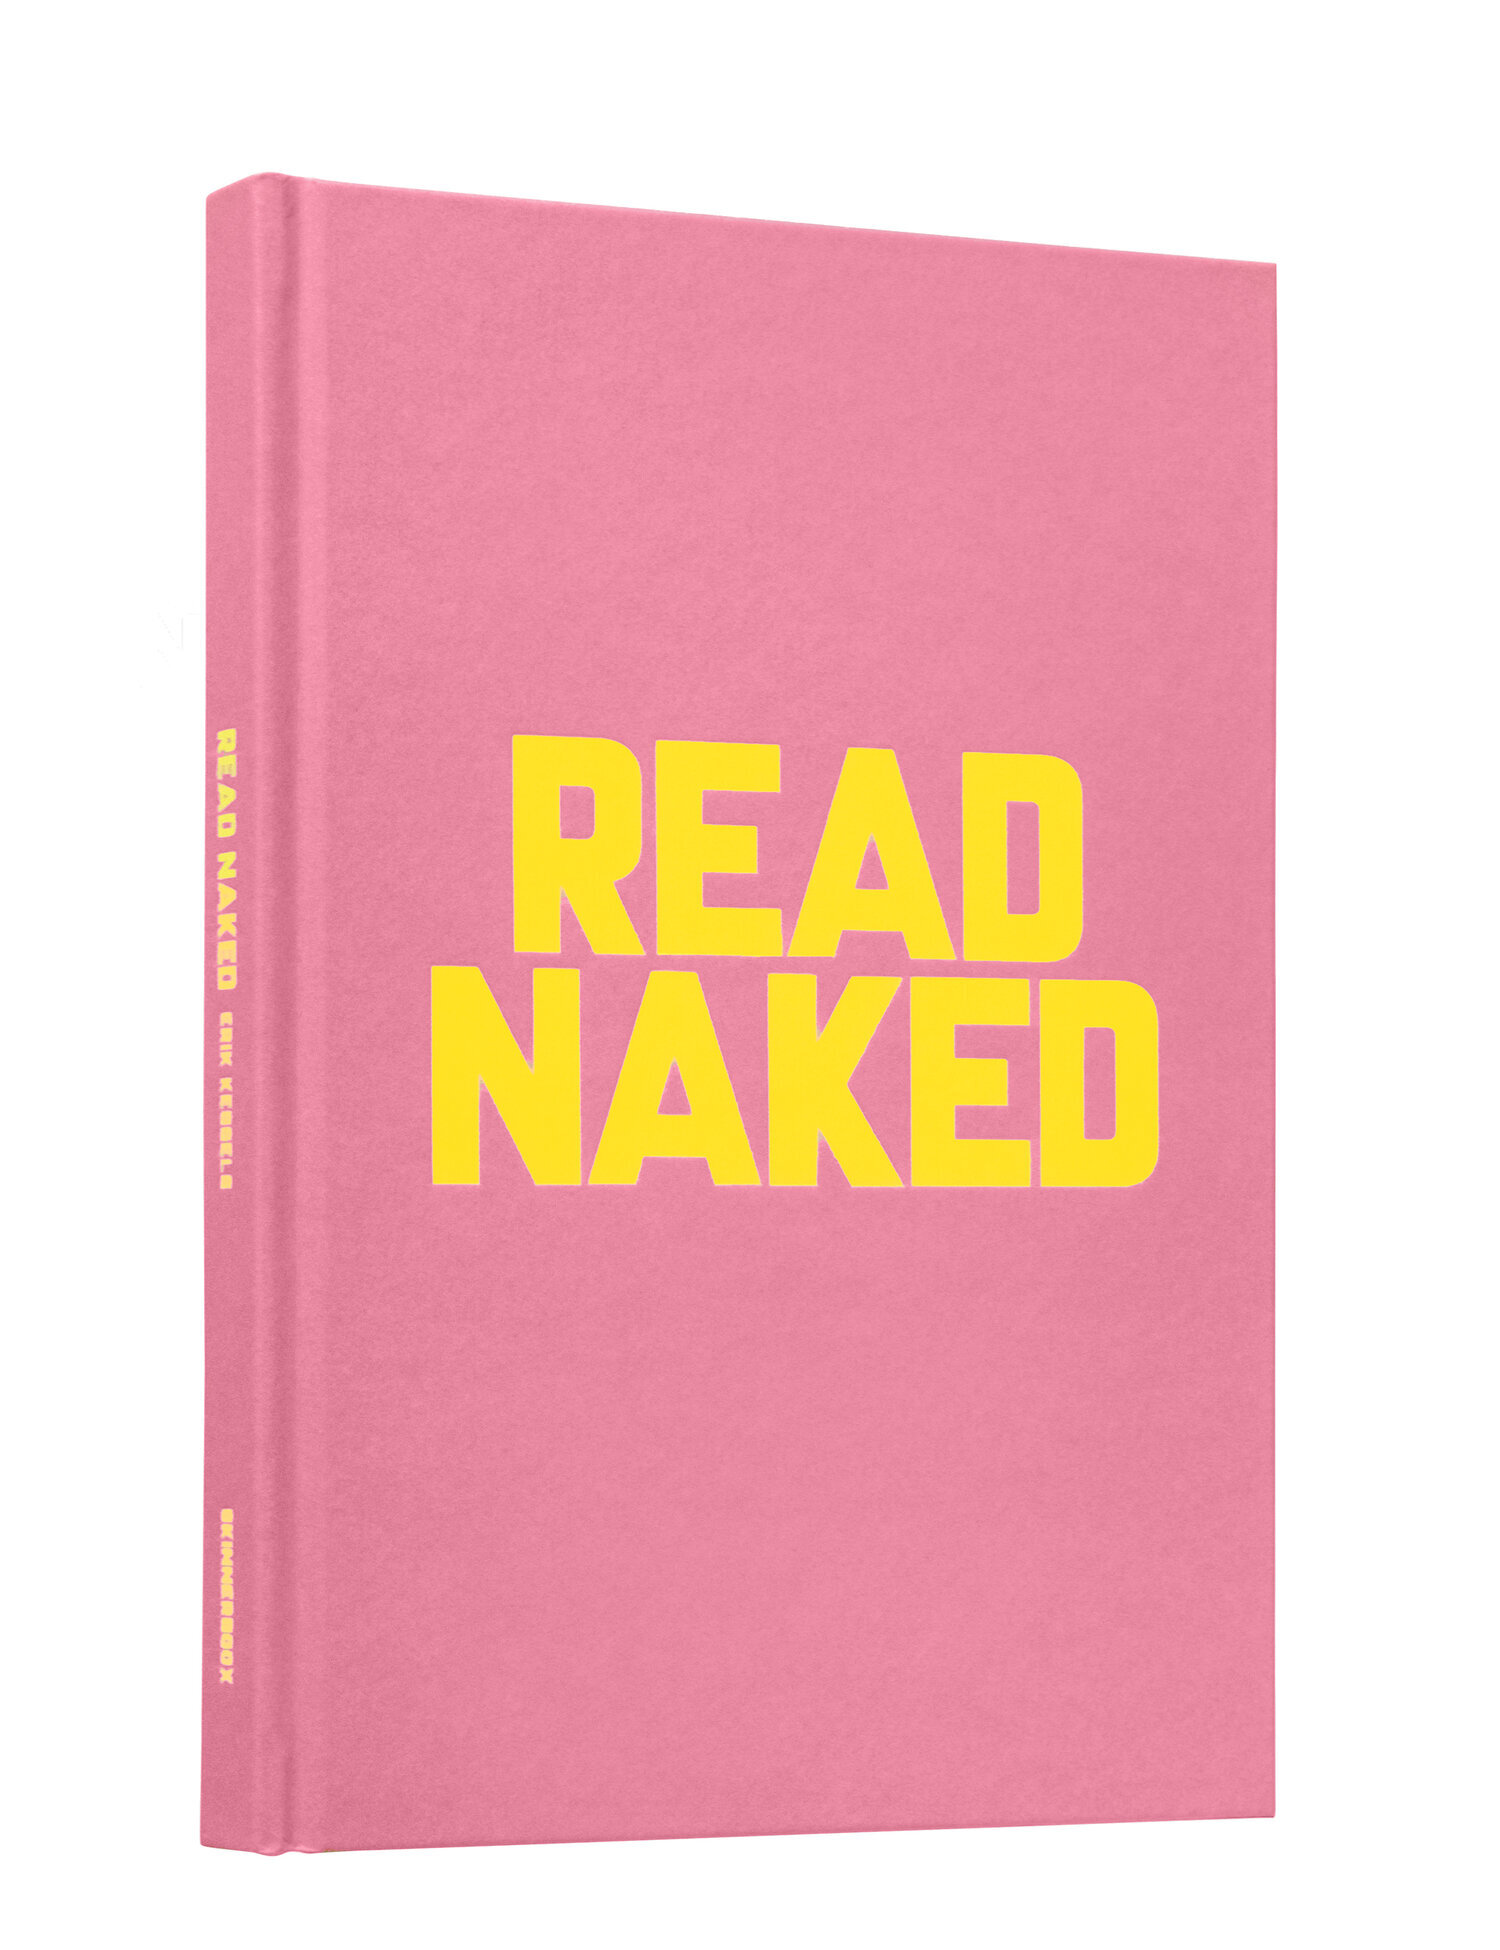 Reading naked book Great literature